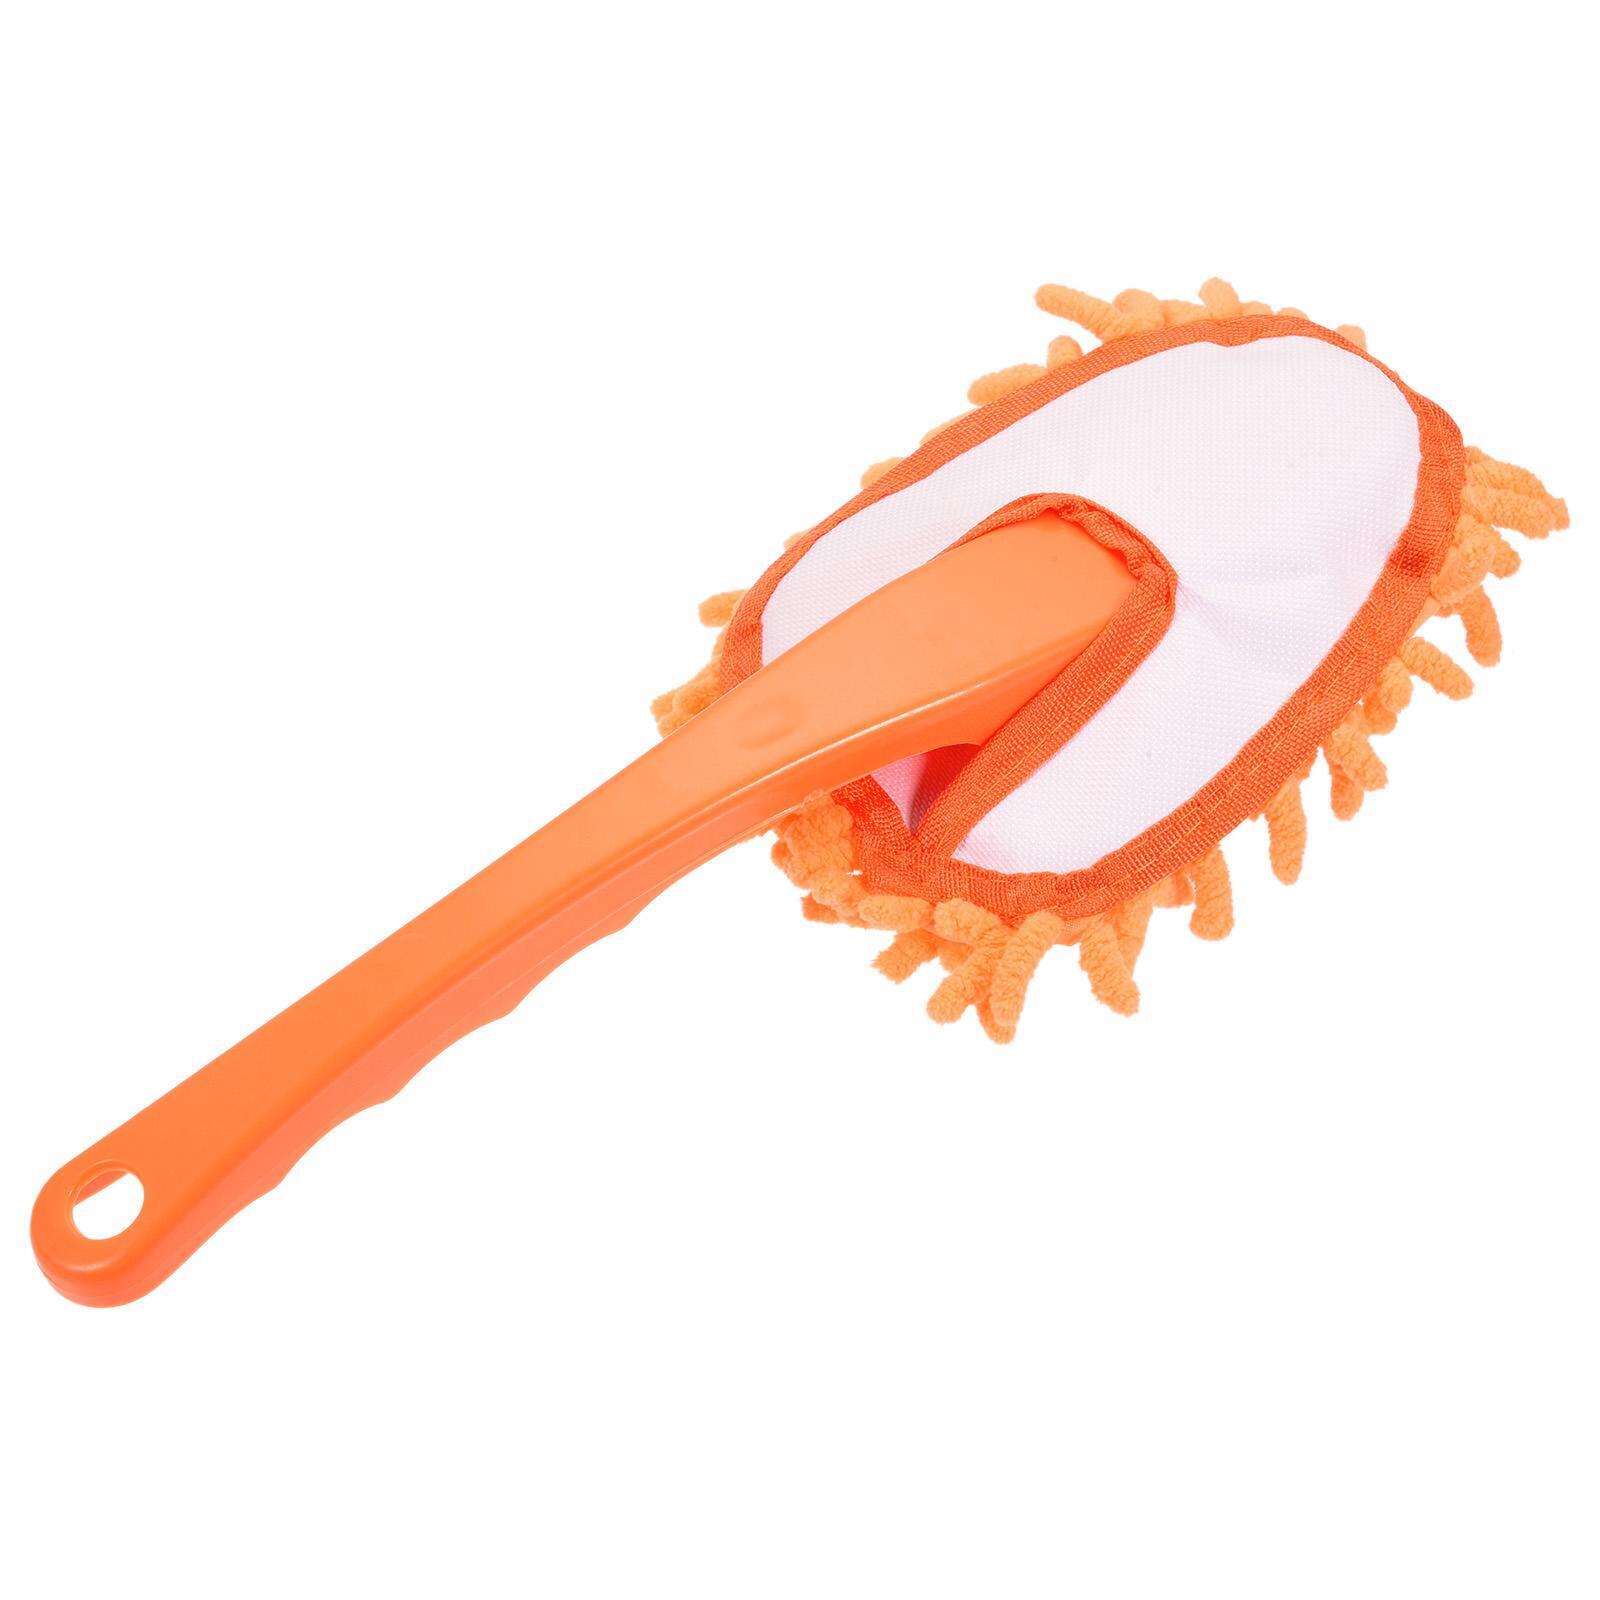 Microfiber Chenille Duster Washable Cleaning Brush Dusting Tool Orange